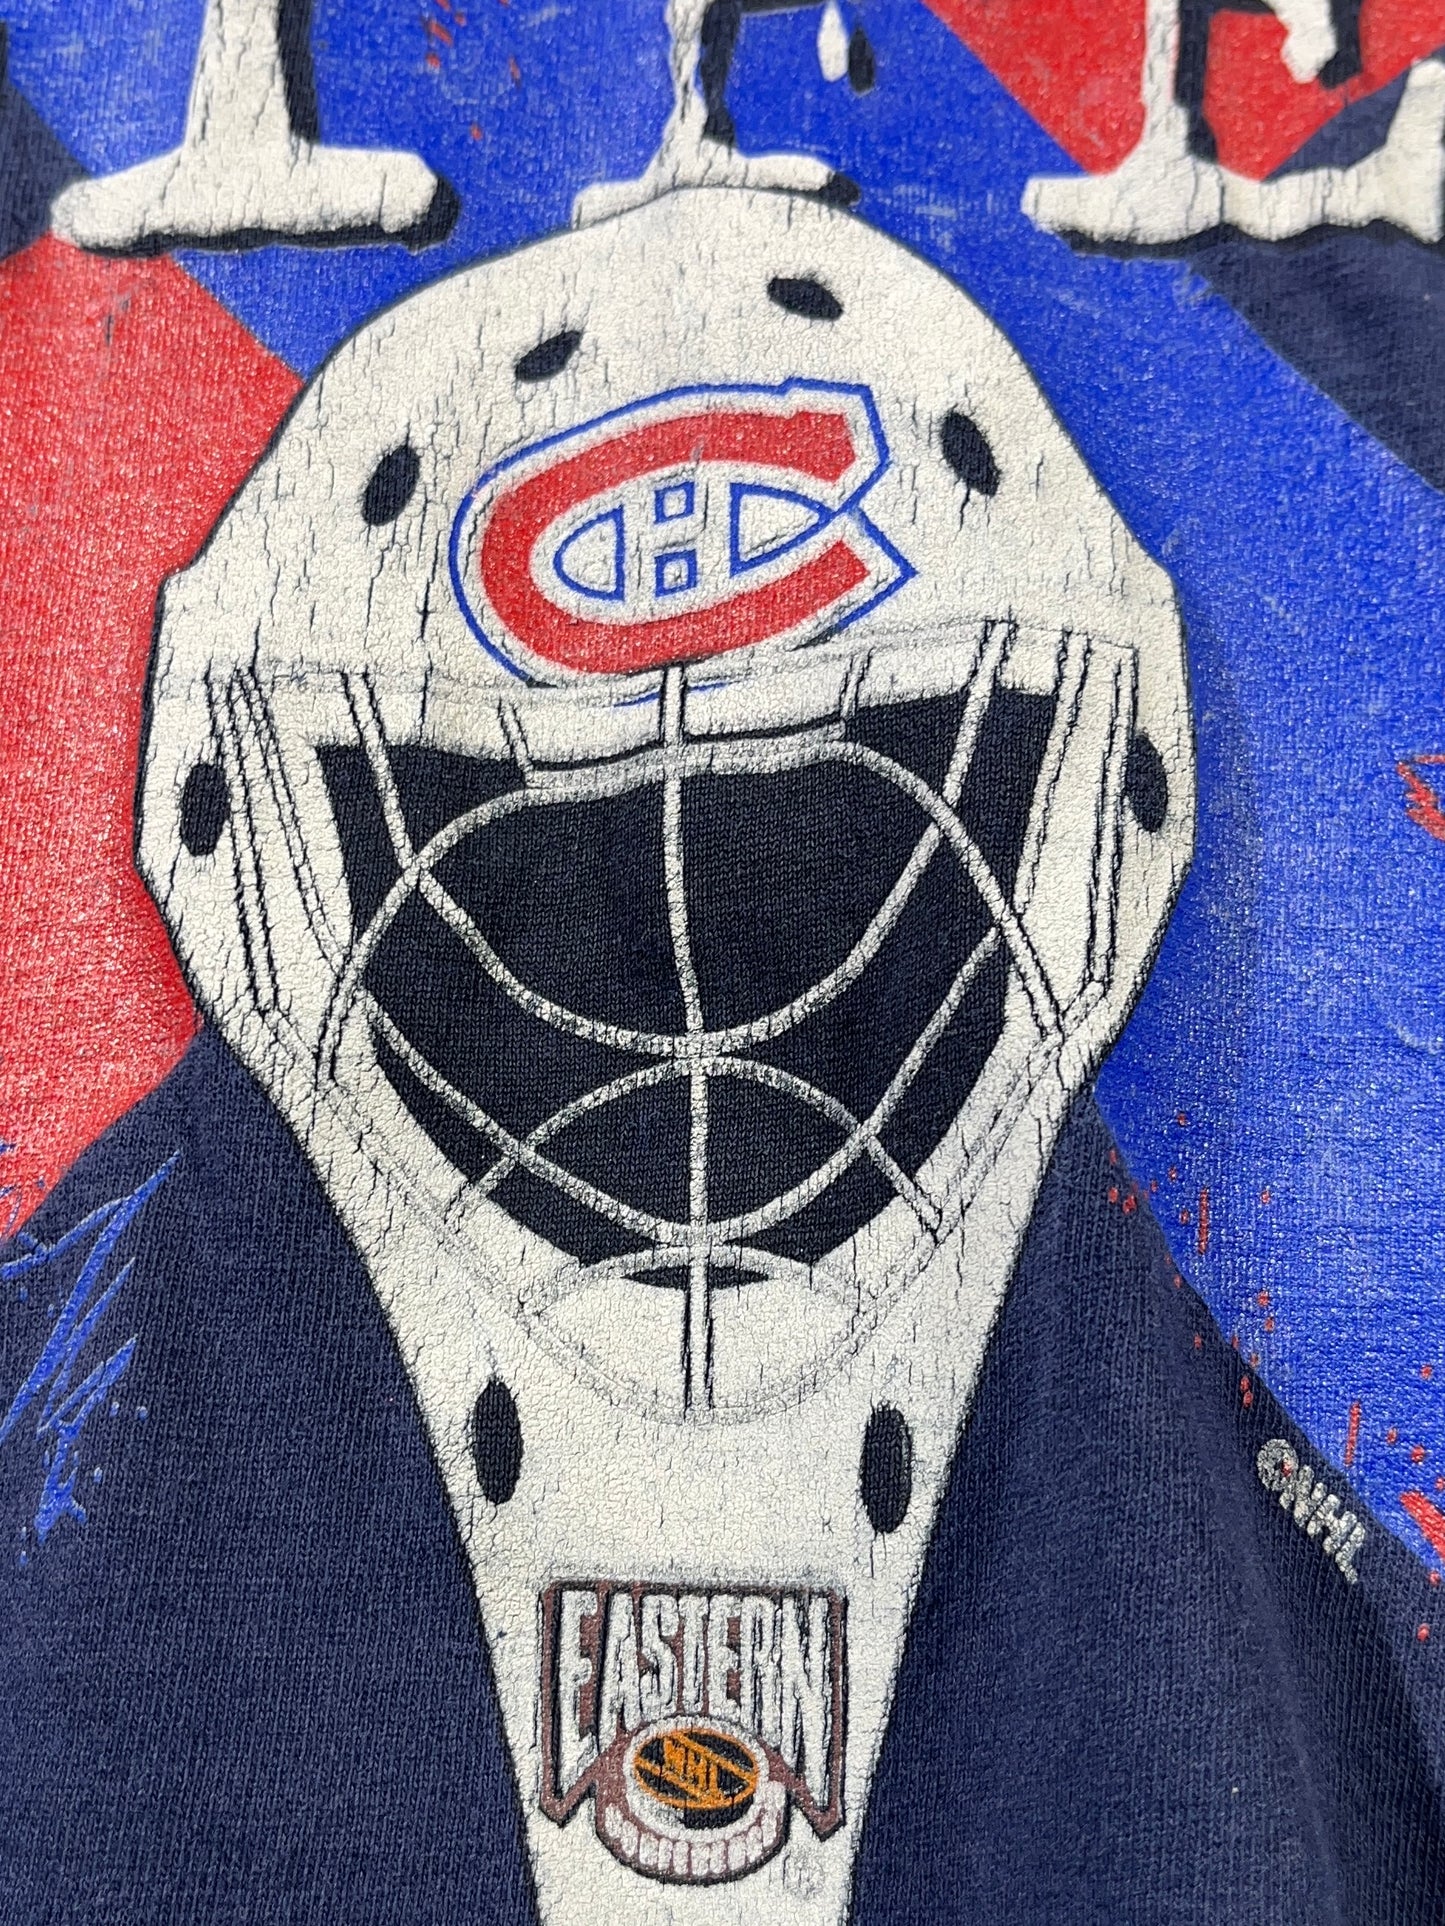 Vintage Montreal Canadiens T-Shirt Baby Tee Goalie Mask NHL 90's